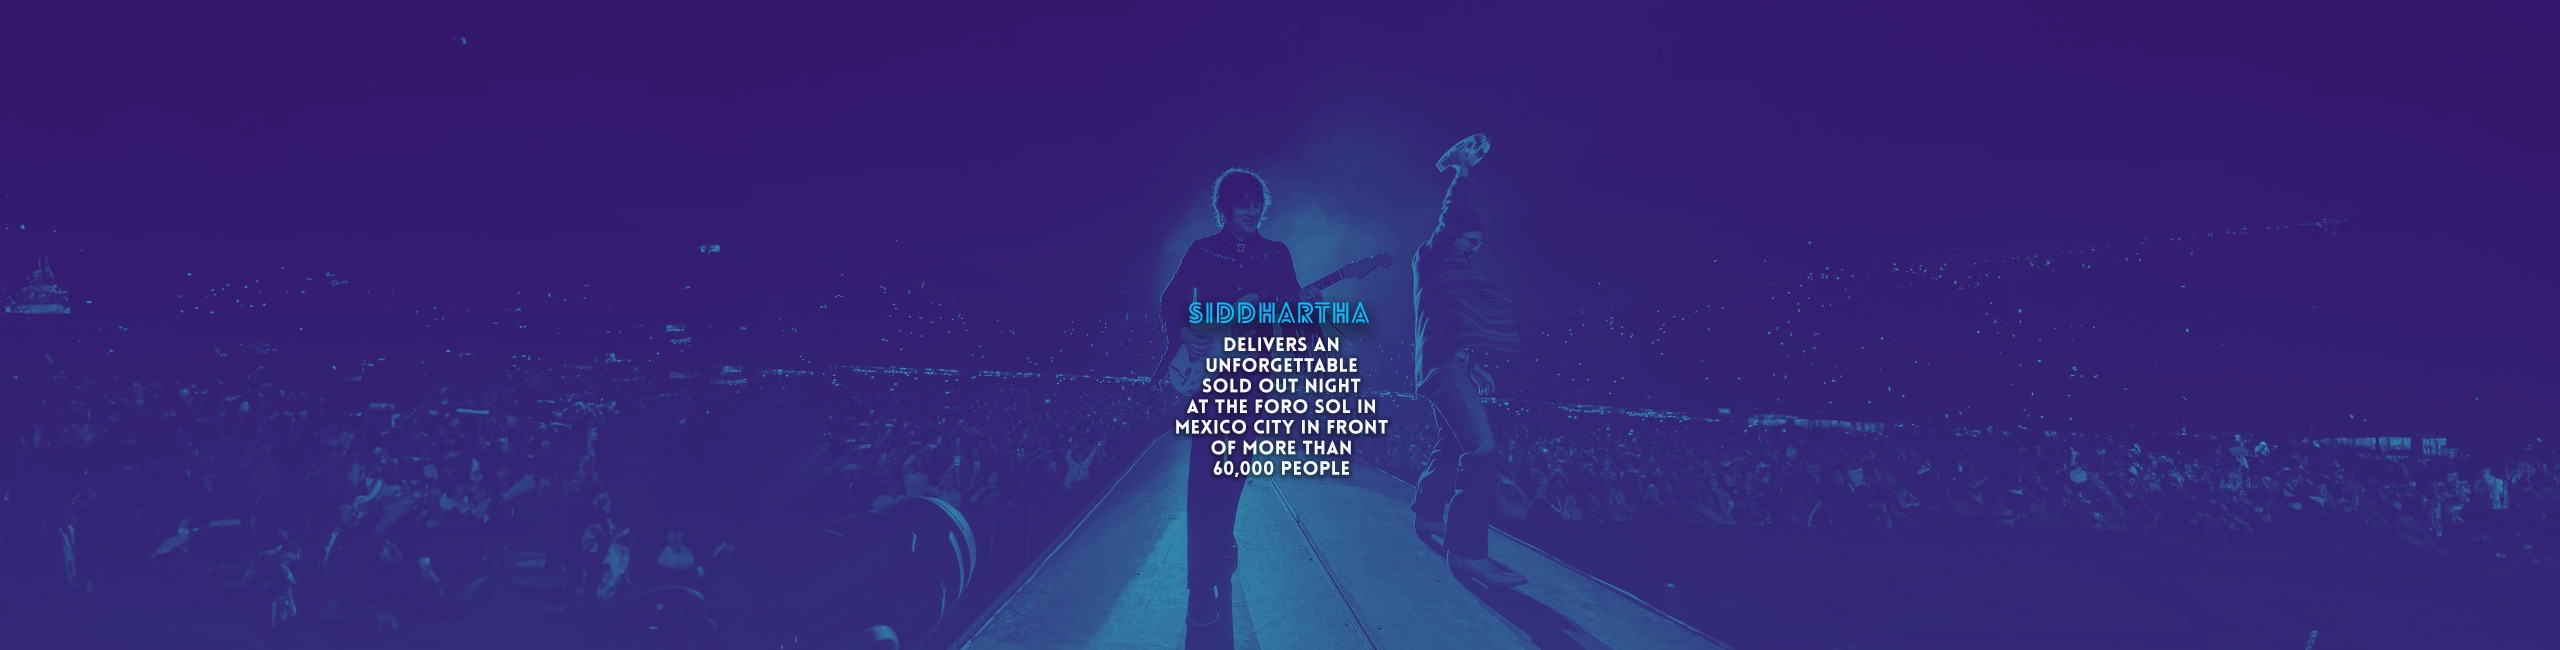 SIDDHARTHA Delivers An Unforgettable SOLD OUT Night At The Foro Sol In Mexico City In Front Of More Than 60,000 people